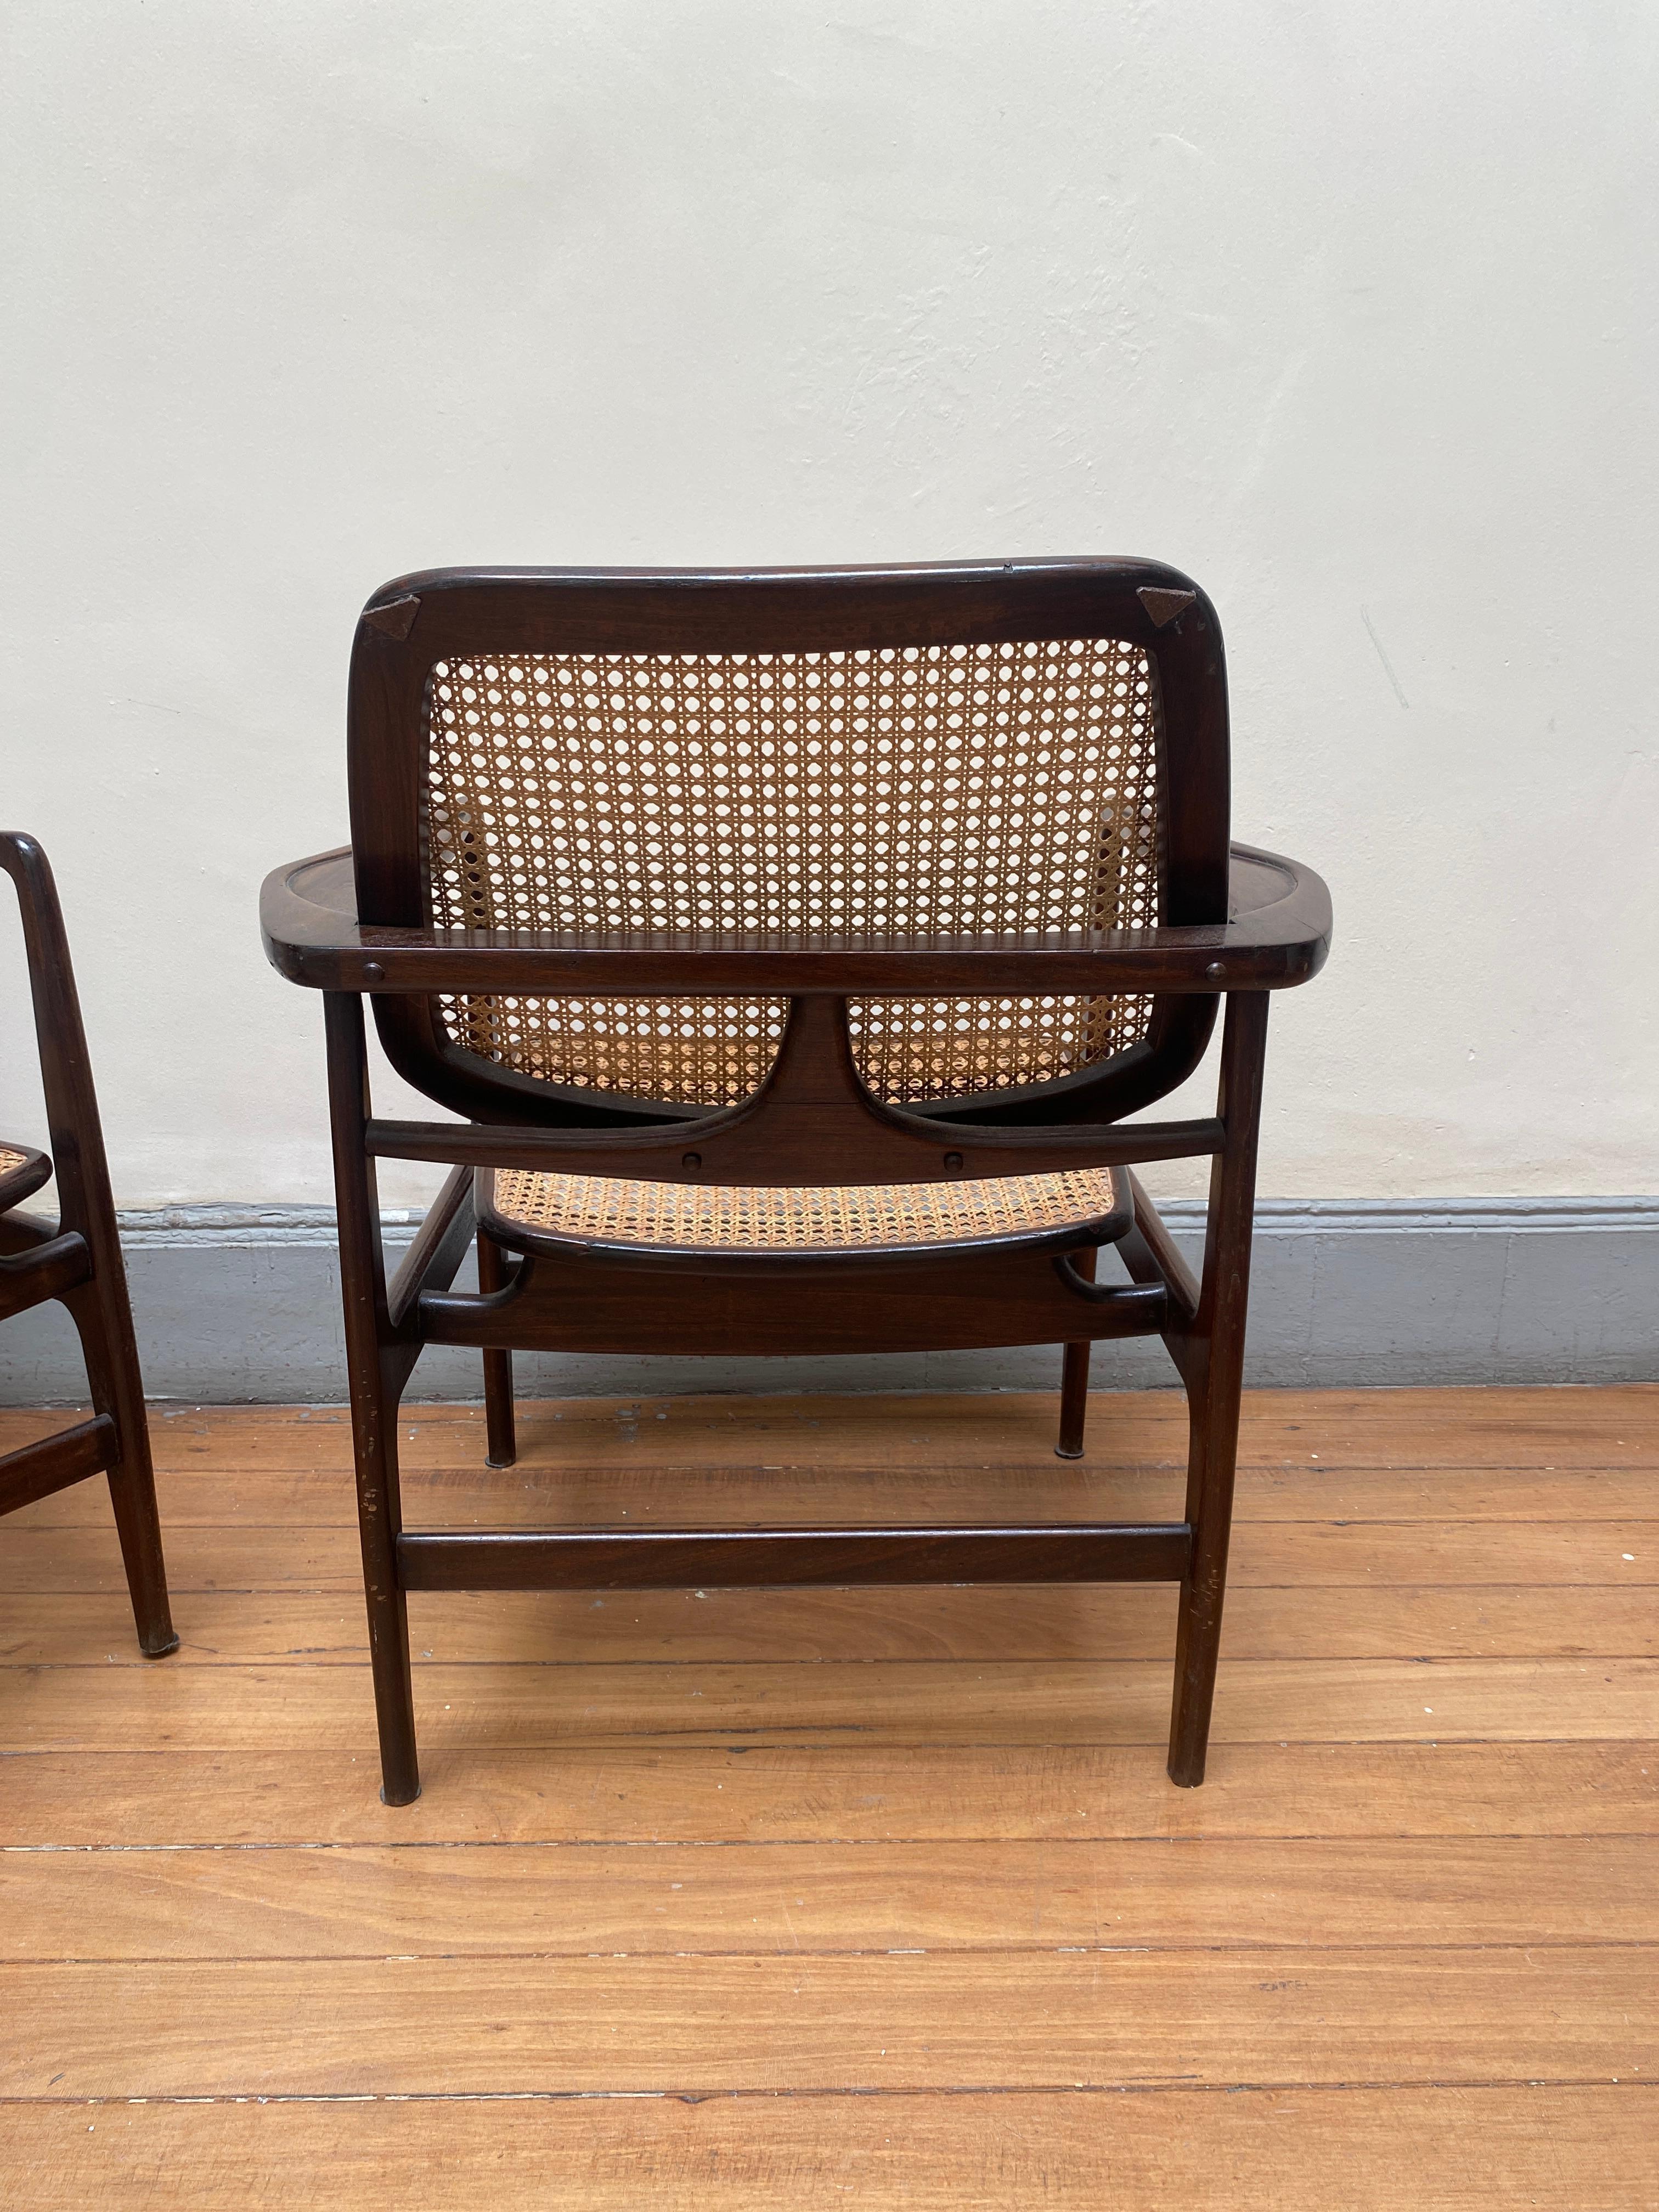 Set of Two Mid-Century Modern Oscar Armchairs by Sergio Rodrigues, Brazil, 1956 For Sale 1